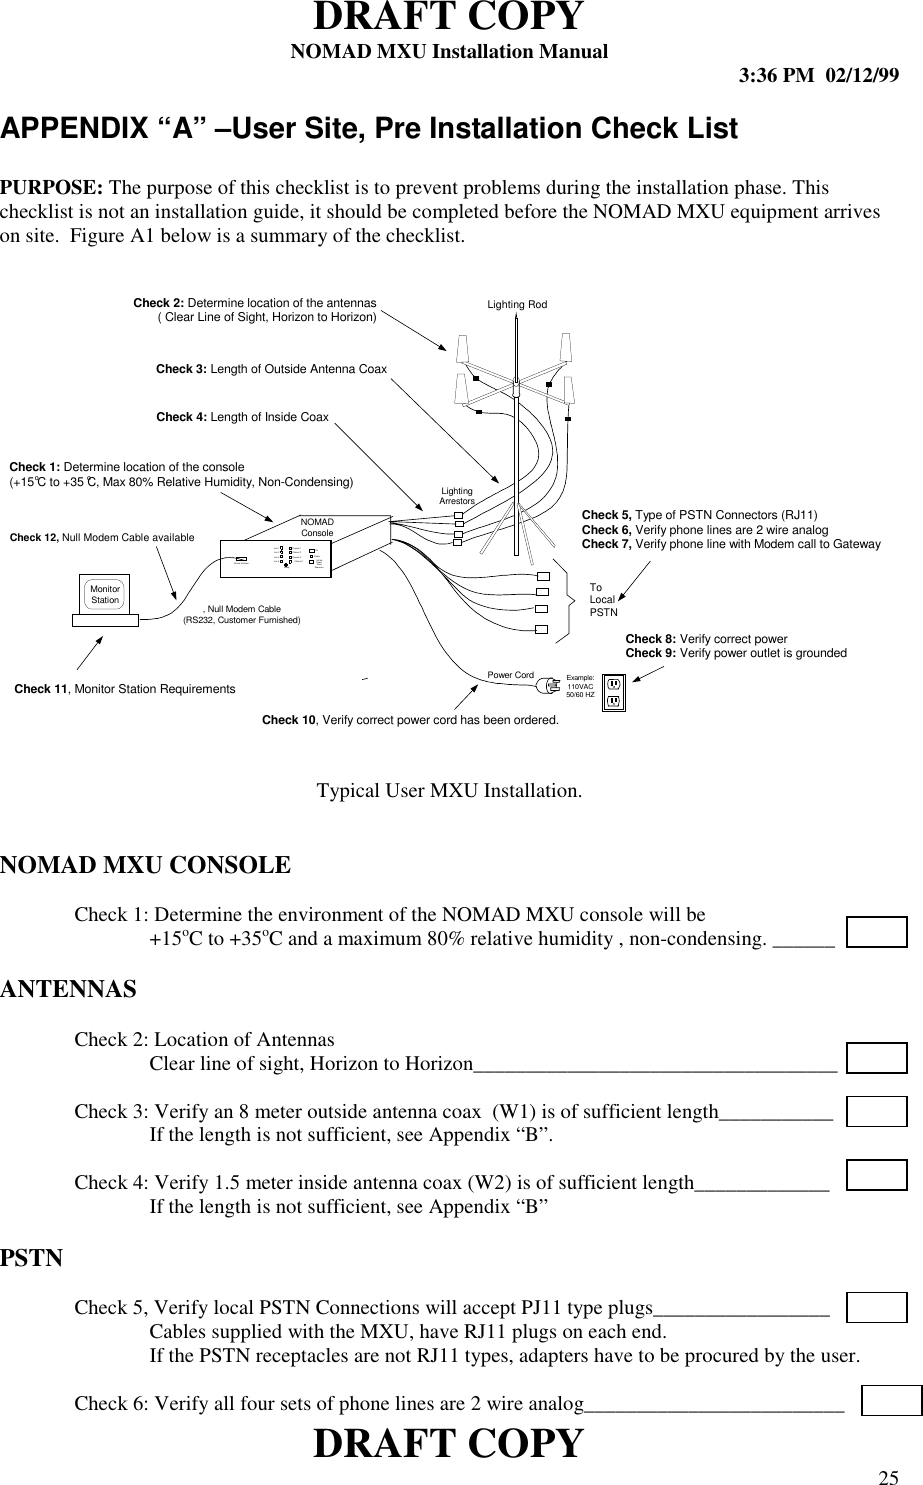 DRAFT COPYNOMAD MXU Installation Manual 3:36 PM  02/12/99DRAFT COPY 25APPENDIX “A” –User Site, Pre Installation Check ListPURPOSE: The purpose of this checklist is to prevent problems during the installation phase. Thischecklist is not an installation guide, it should be completed before the NOMAD MXU equipment arriveson site.  Figure A1 below is a summary of the checklist.Typical User MXU Installation.NOMAD MXU CONSOLECheck 1: Determine the environment of the NOMAD MXU console will be+15oC to +35oC and a maximum 80% relative humidity , non-condensing. ______ANTENNASCheck 2: Location of AntennasClear line of sight, Horizon to Horizon___________________________________Check 3: Verify an 8 meter outside antenna coax  (W1) is of sufficient length___________If the length is not sufficient, see Appendix “B”.Check 4: Verify 1.5 meter inside antenna coax (W2) is of sufficient length_____________If the length is not sufficient, see Appendix “B”PSTNCheck 5, Verify local PSTN Connections will accept PJ11 type plugs_________________Cables supplied with the MXU, have RJ11 plugs on each end.If the PSTN receptacles are not RJ11 types, adapters have to be procured by the user.Check 6: Verify all four sets of phone lines are 2 wire analog_________________________Line 1Line 2Line 3Line 4Channe l 1Channel 2Channe l 3OnReadyPowerChannel  1 InitiatePowerDownSequenc eControl InterfaceExample:110VAC50/60 HZ, Null Modem Cable(RS232, Customer Furnished)Power CordCheck 1: Determine location of the console(+15 C to +35 C, Max 80% Relative Humidity, Non-Condensing)Check 2: Determine location of the antennas( Clear Line of Sight, Horizon to Horizon)Check 3: Length of Outside Antenna CoaxCheck 4: Length of Inside CoaxCheck 5, Type of PSTN Connectors (RJ11)Check 6, Verify phone lines are 2 wire analogCheck 7, Verify phone line with Modem call to GatewayCheck 10, Verify correct power cord has been ordered.Check 11, Monitor Station RequirementsToLocalPSTNNOMADConsoleLightingArrestorsLighting RodMonitorStationCheck 8: Verify correct powerCheck 9: Verify power outlet is groundedCheck 12, Null Modem Cable availableoo